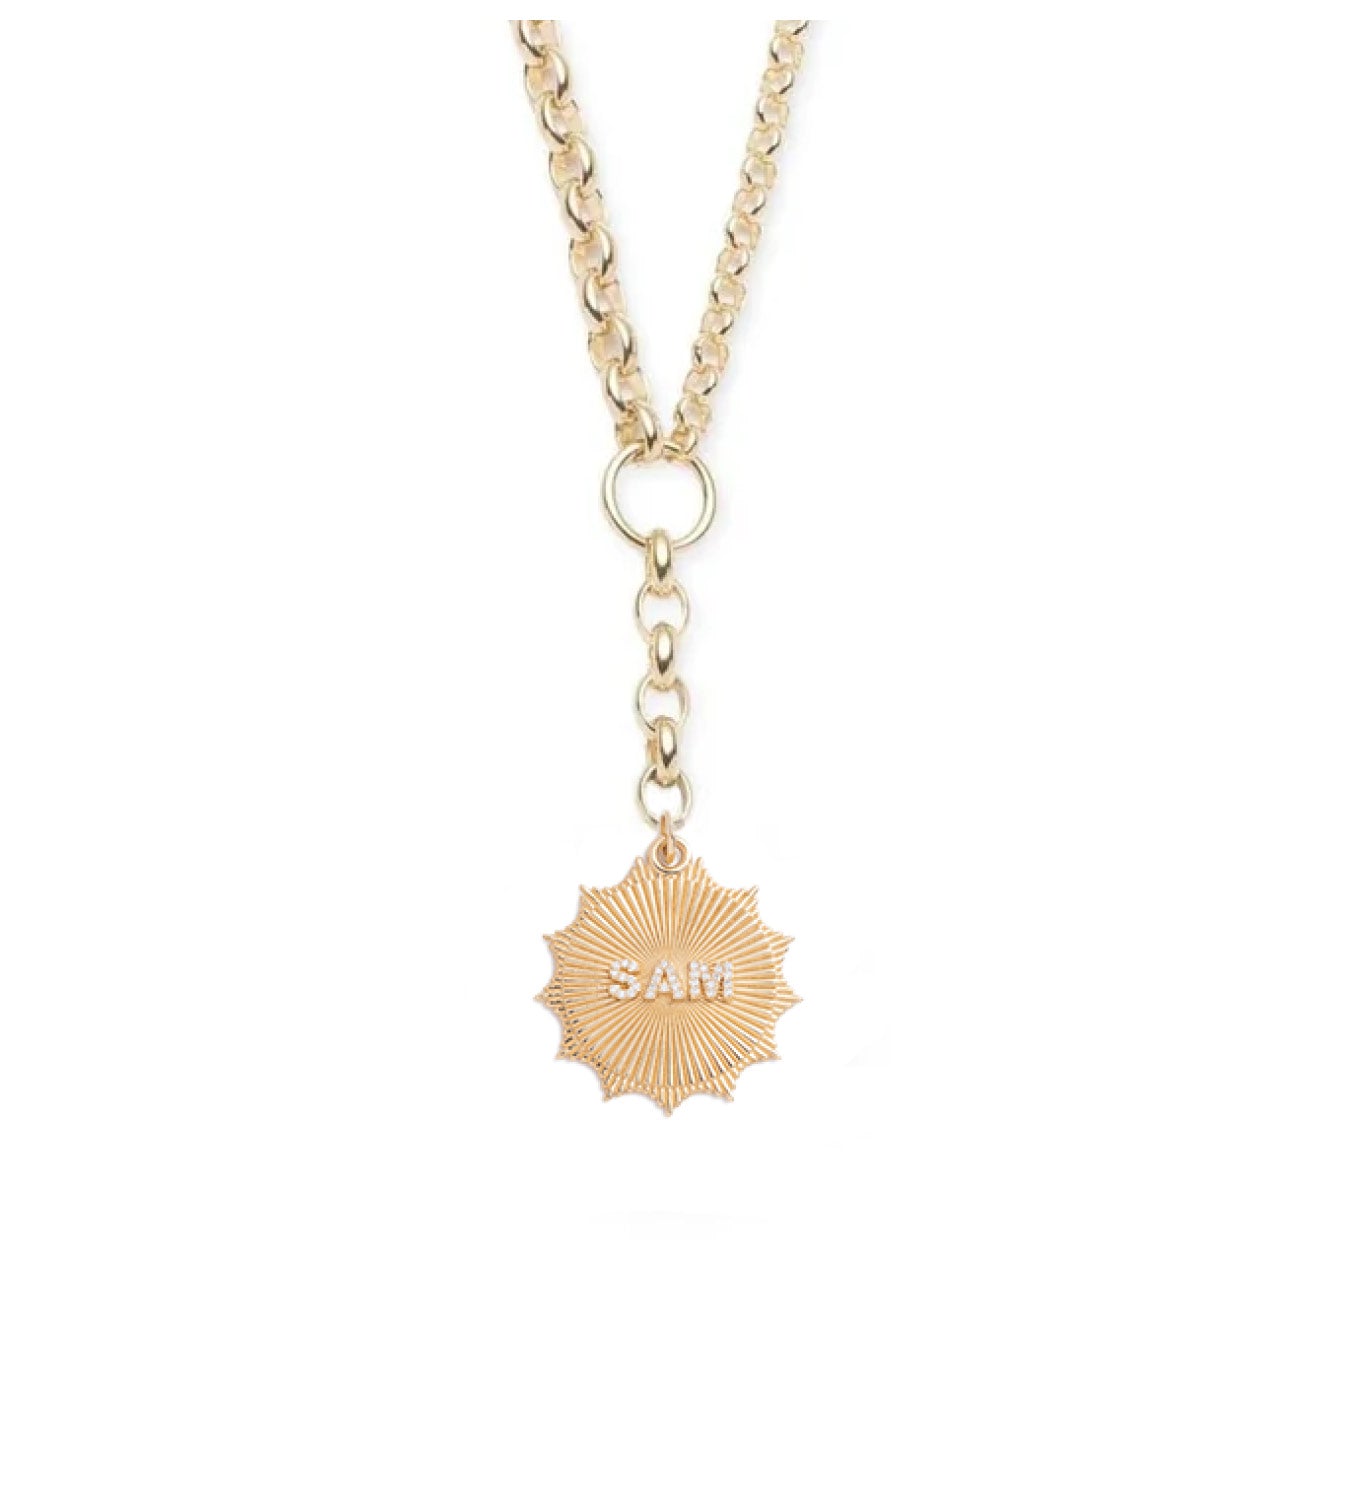 Custom Centered Radiating Love Token : Heavy Mixed Belcher Extension Chain Necklace